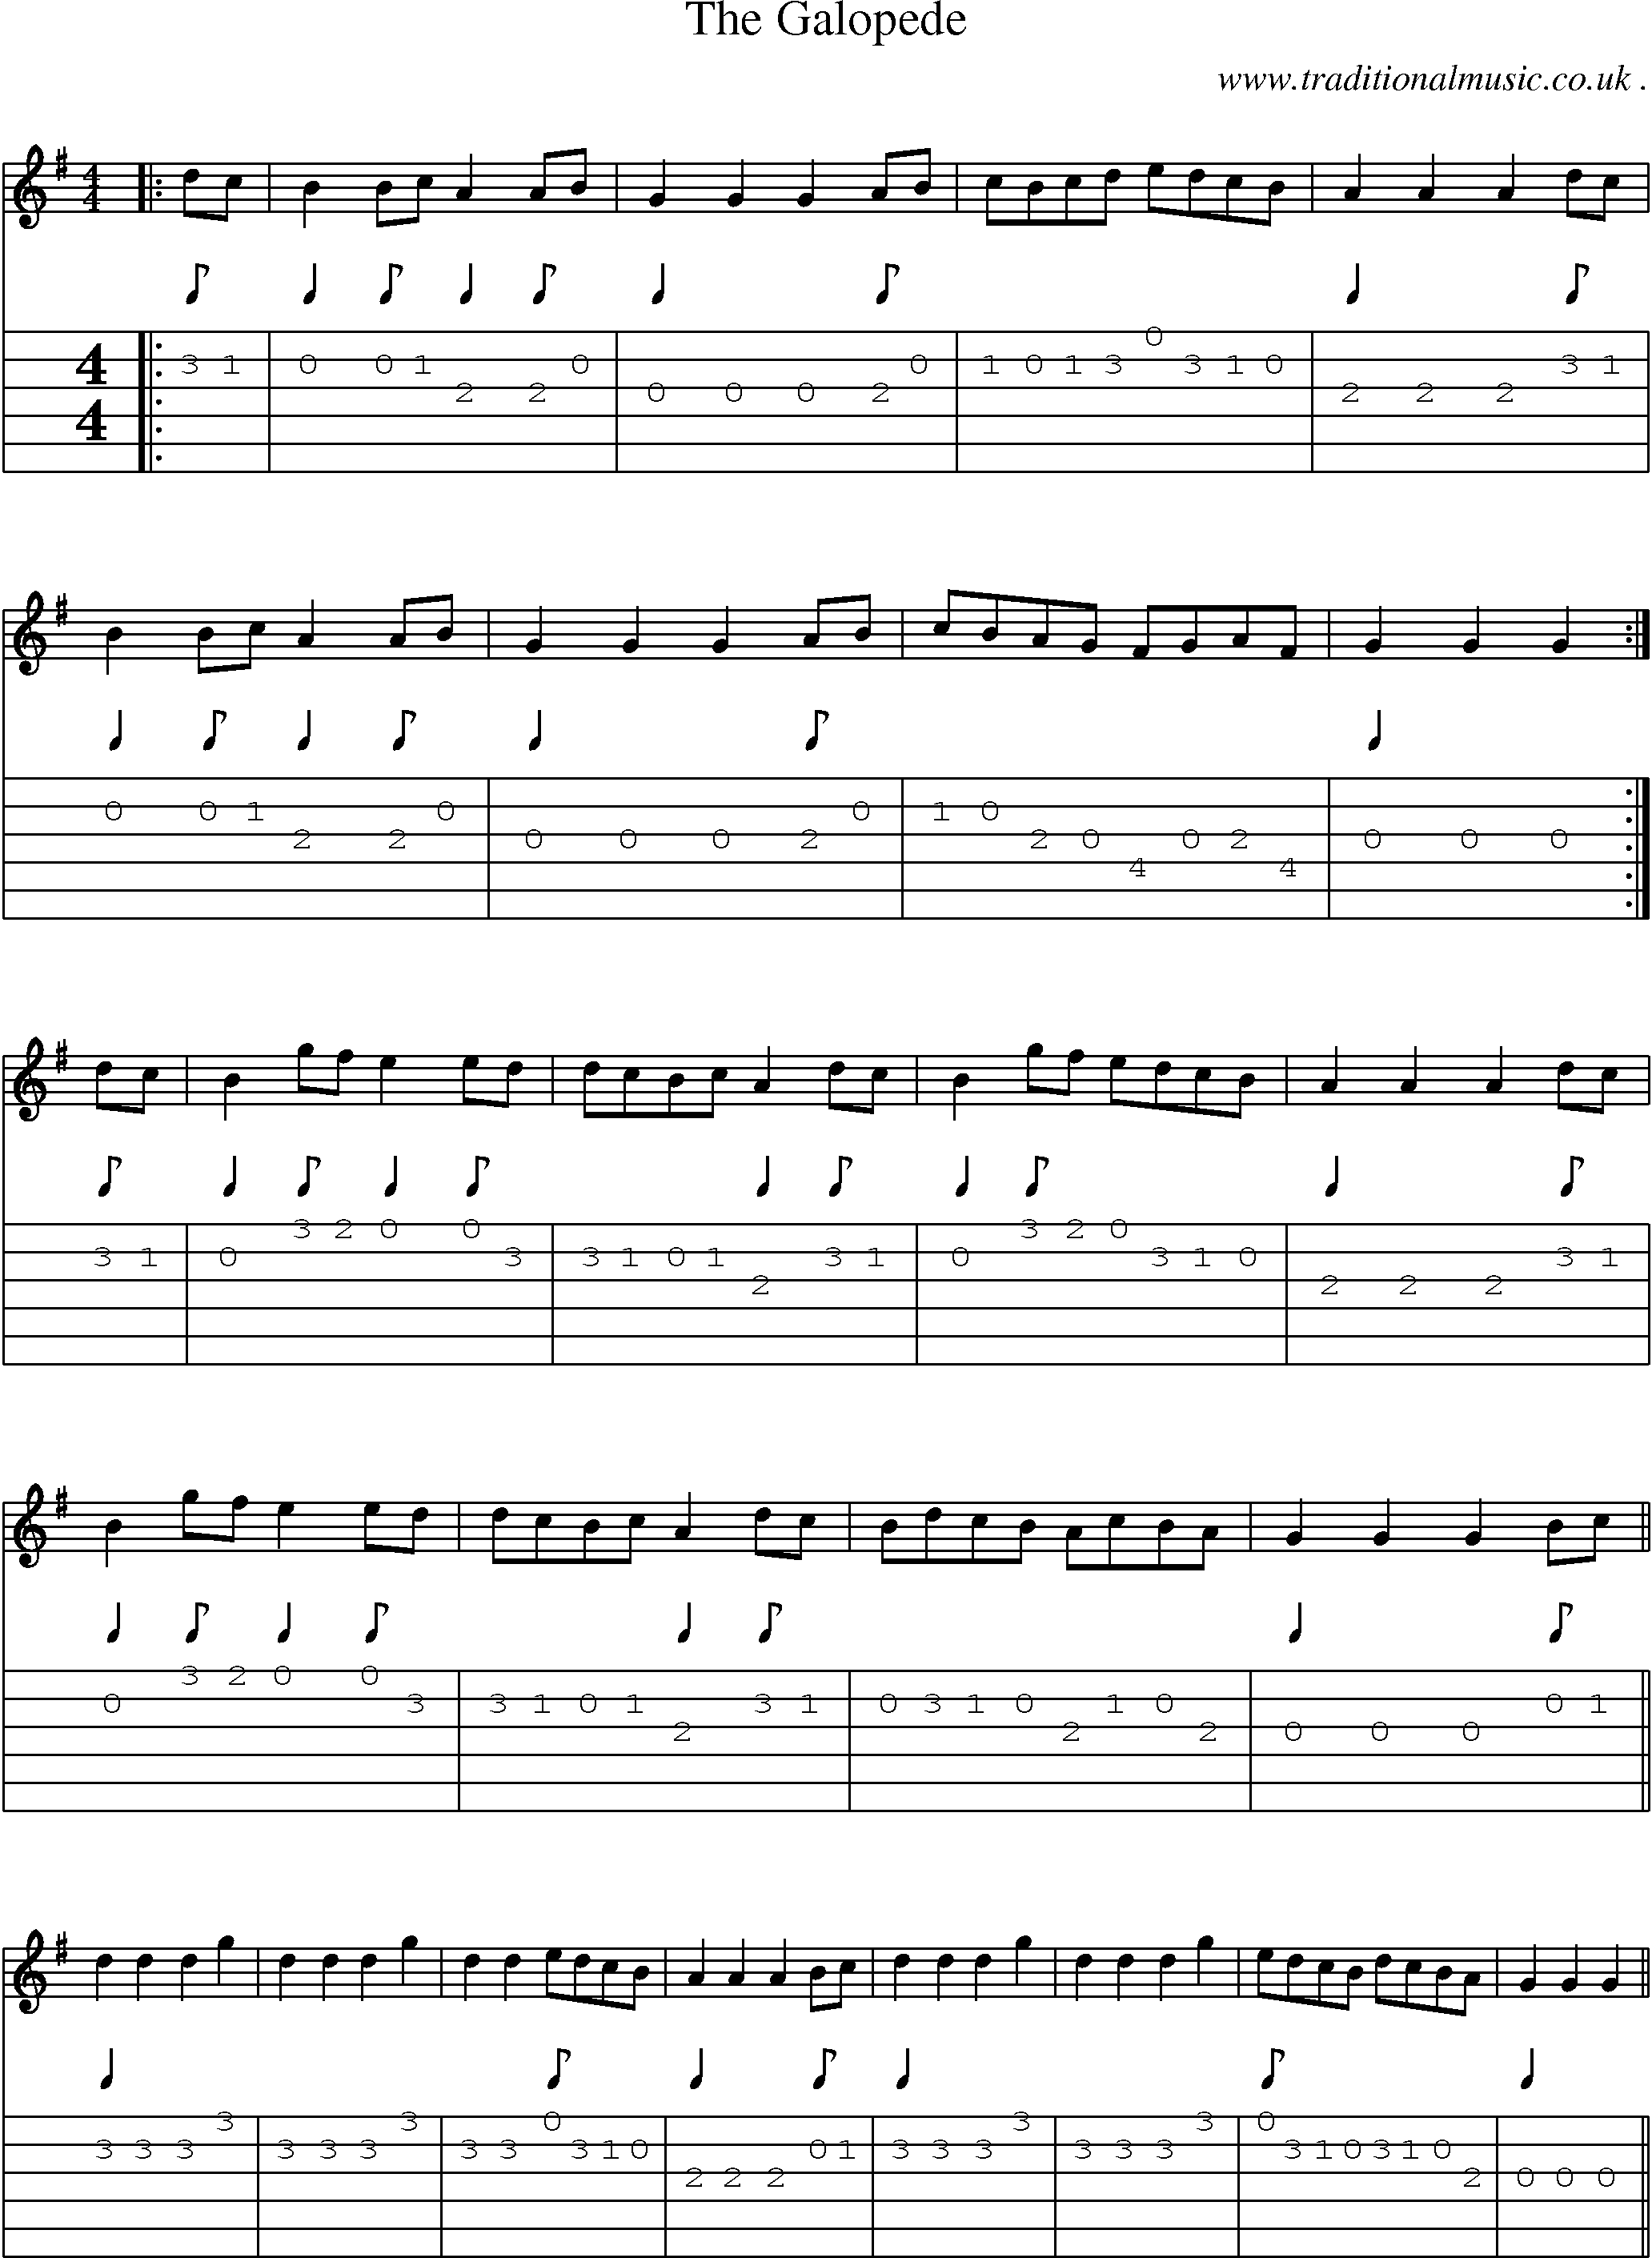 Sheet-Music and Guitar Tabs for The Galopede